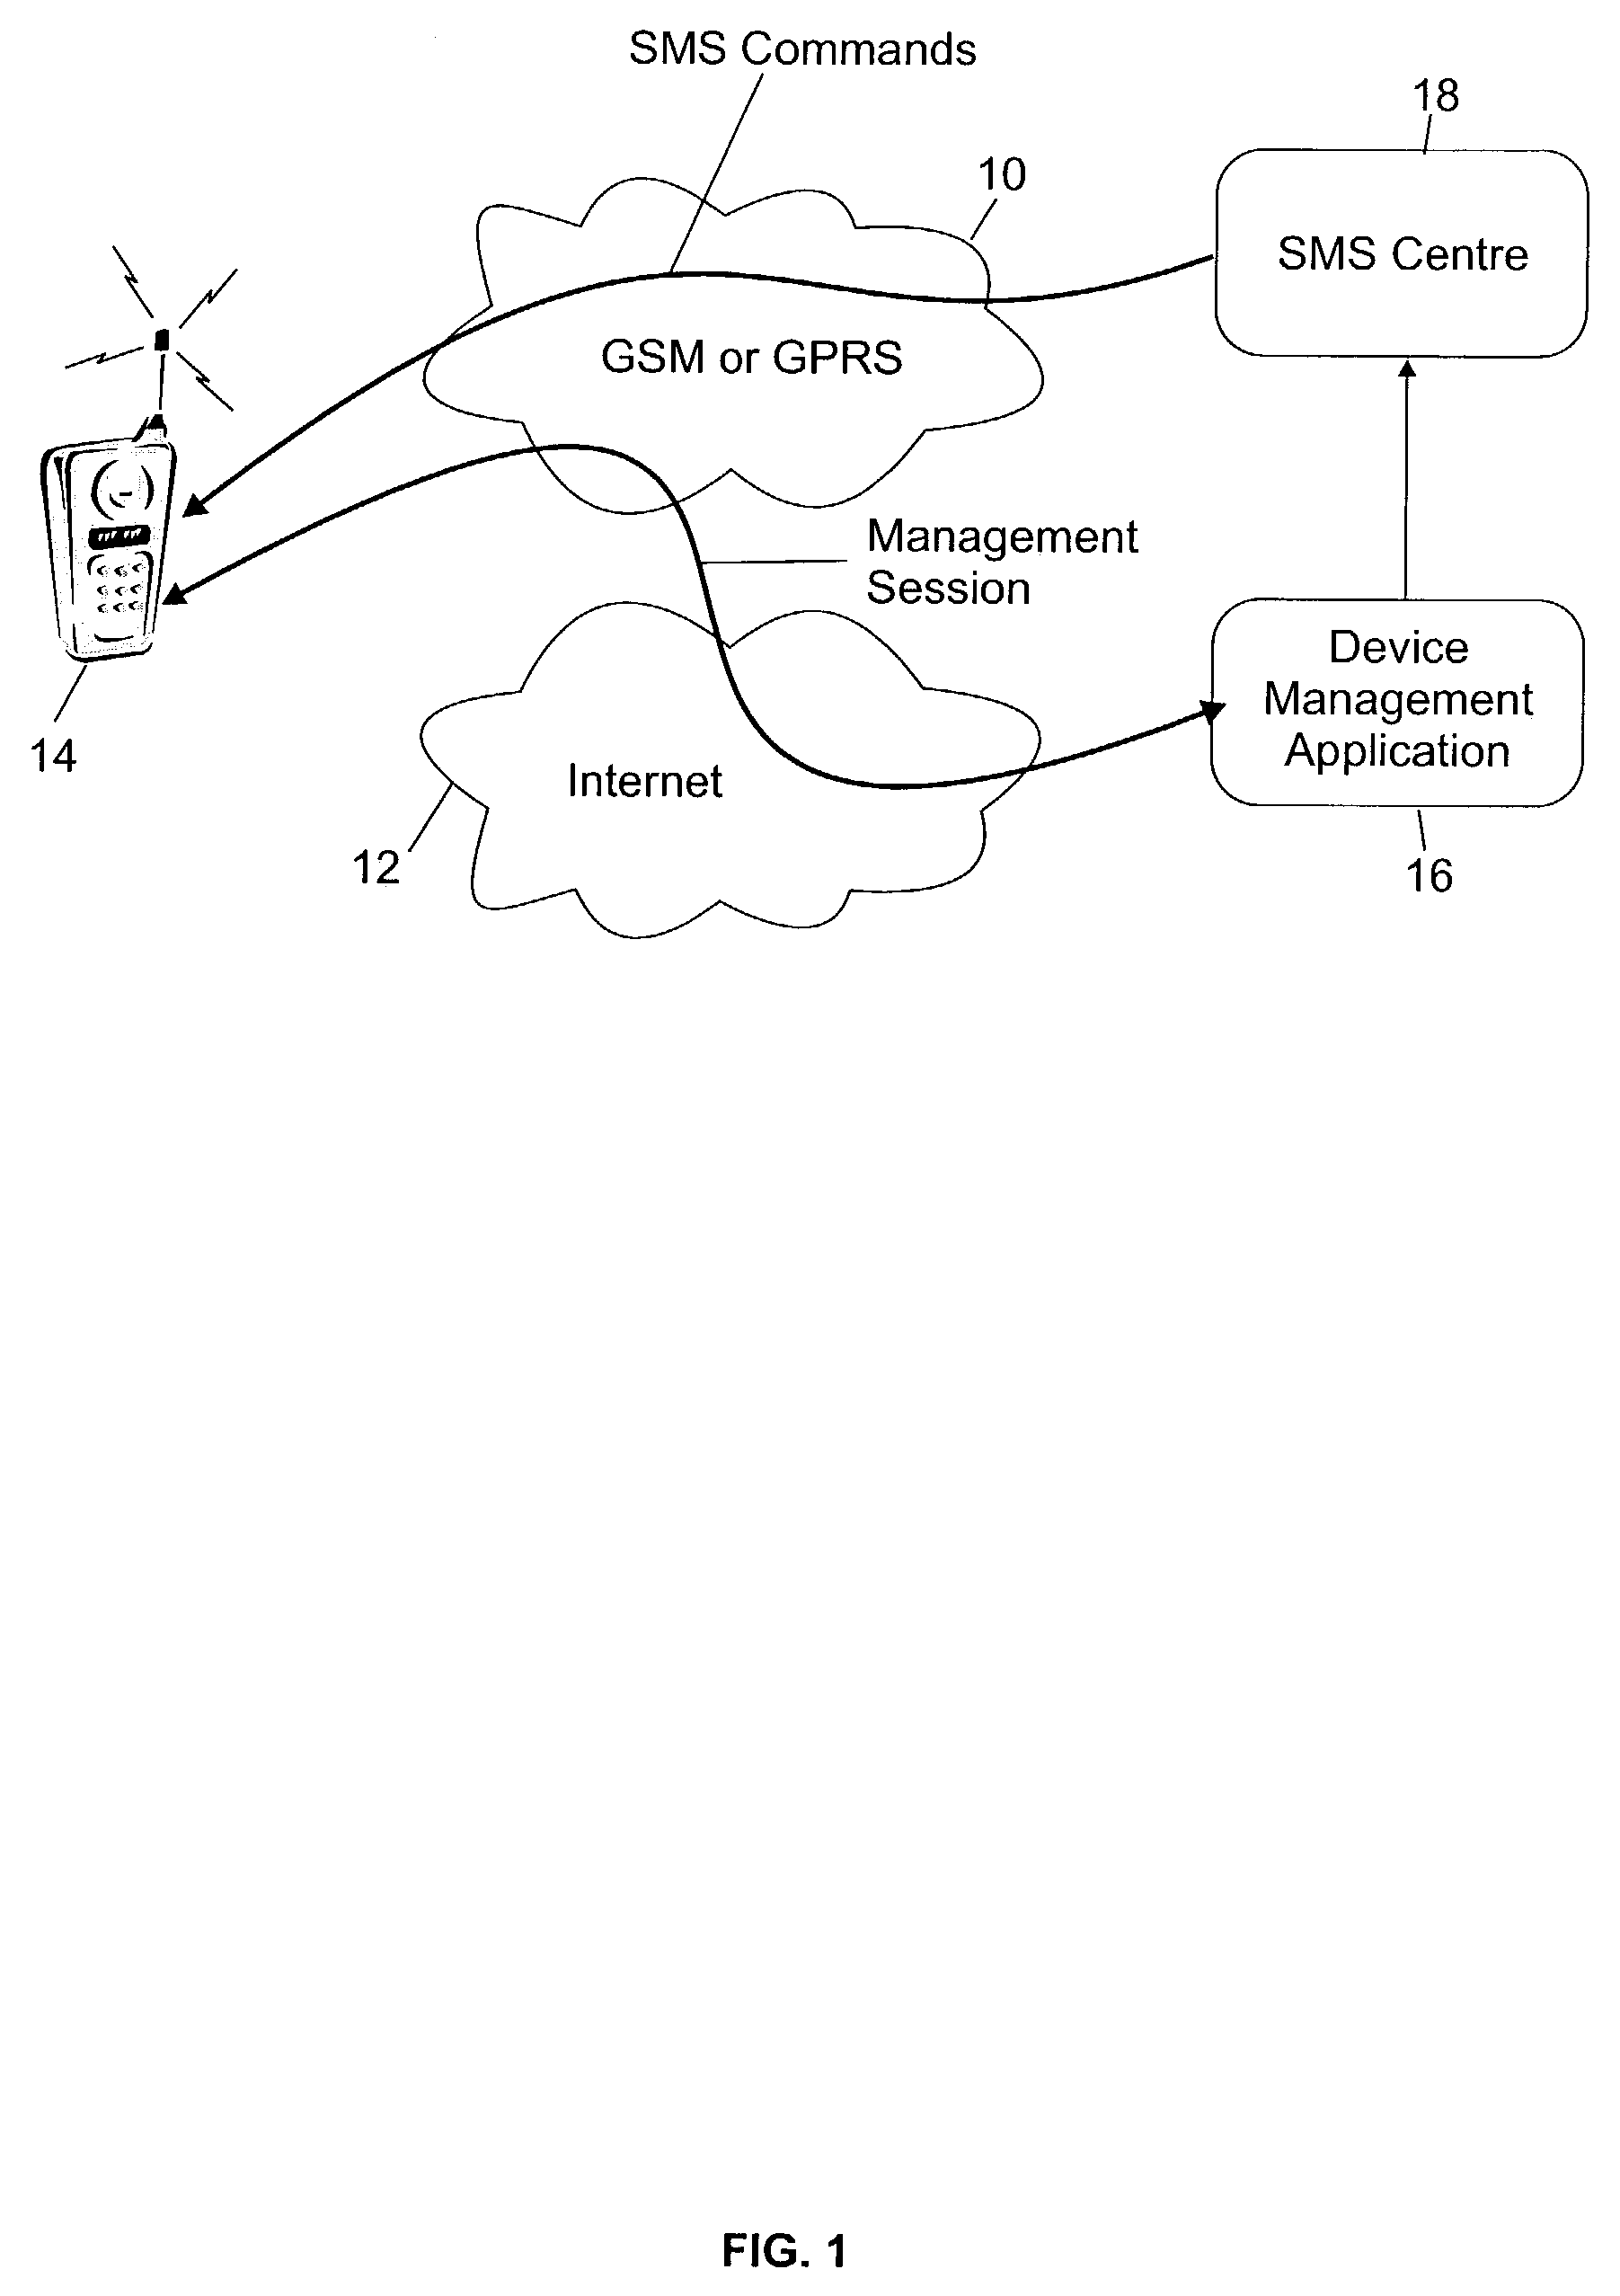 System and method for digital signature authentication of SMS messages